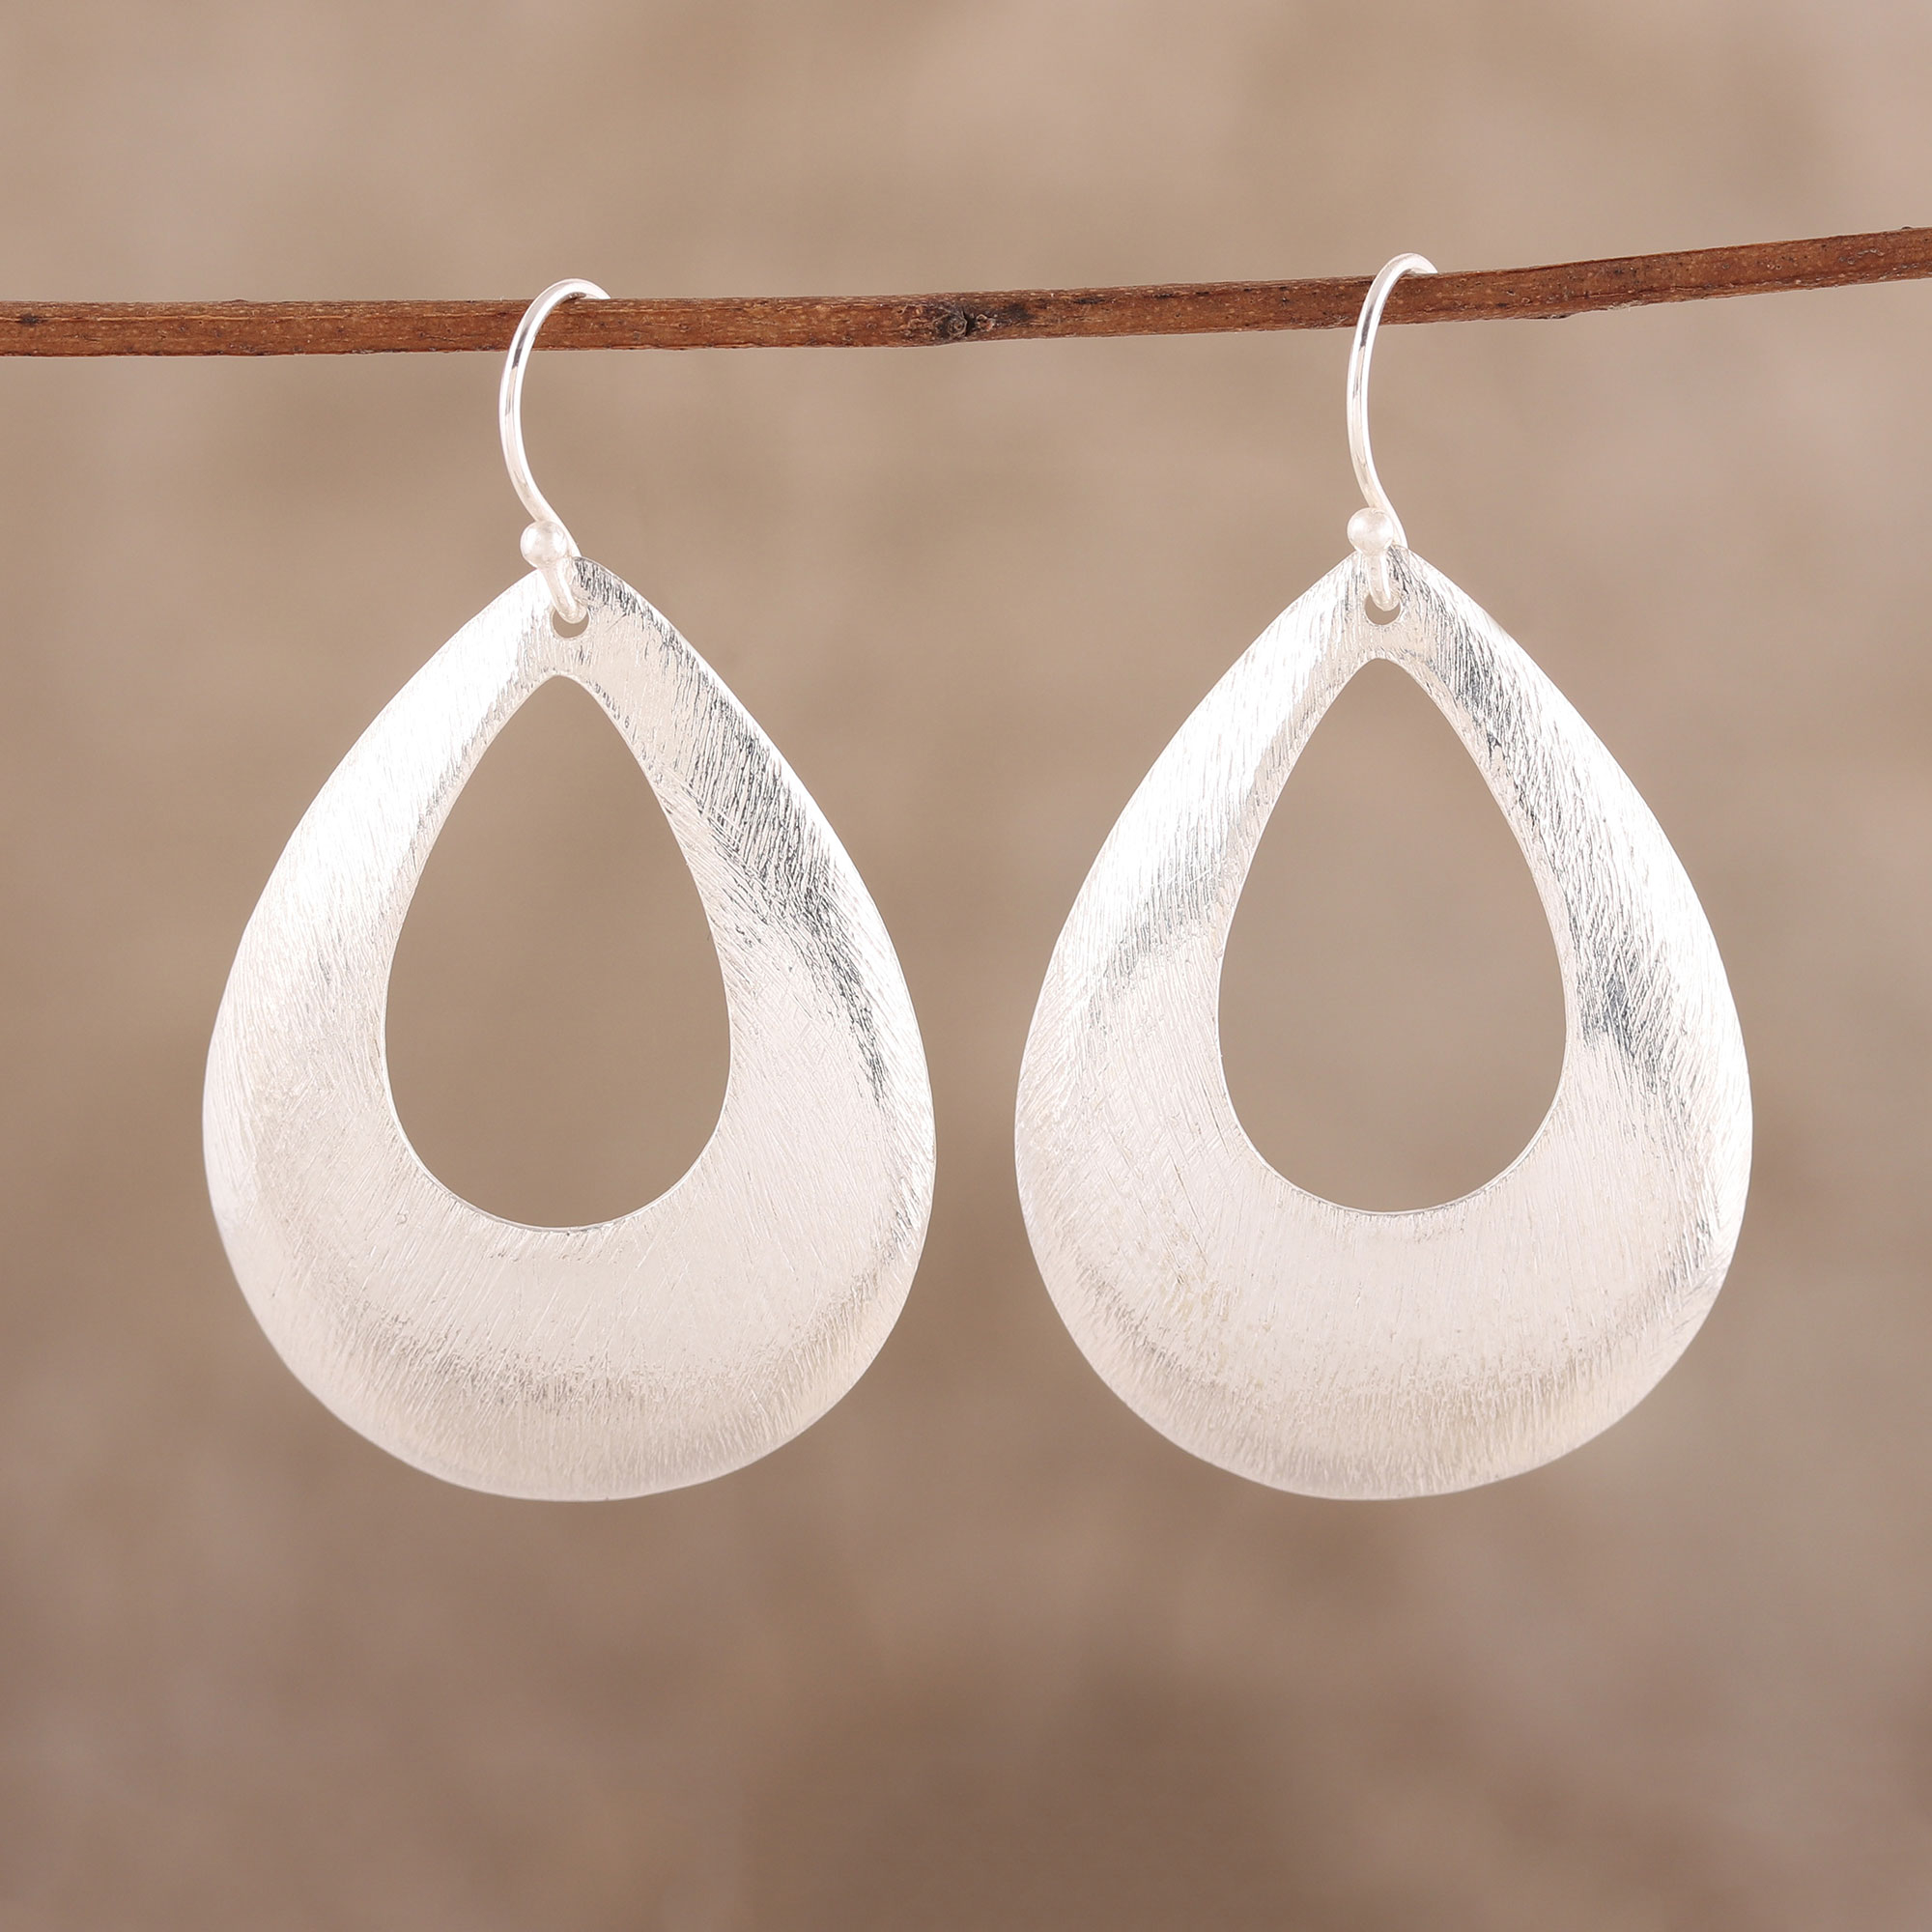 Brushed-Satin Sterling Silver Dangle Earrings from India - Shimmering  Raindrops